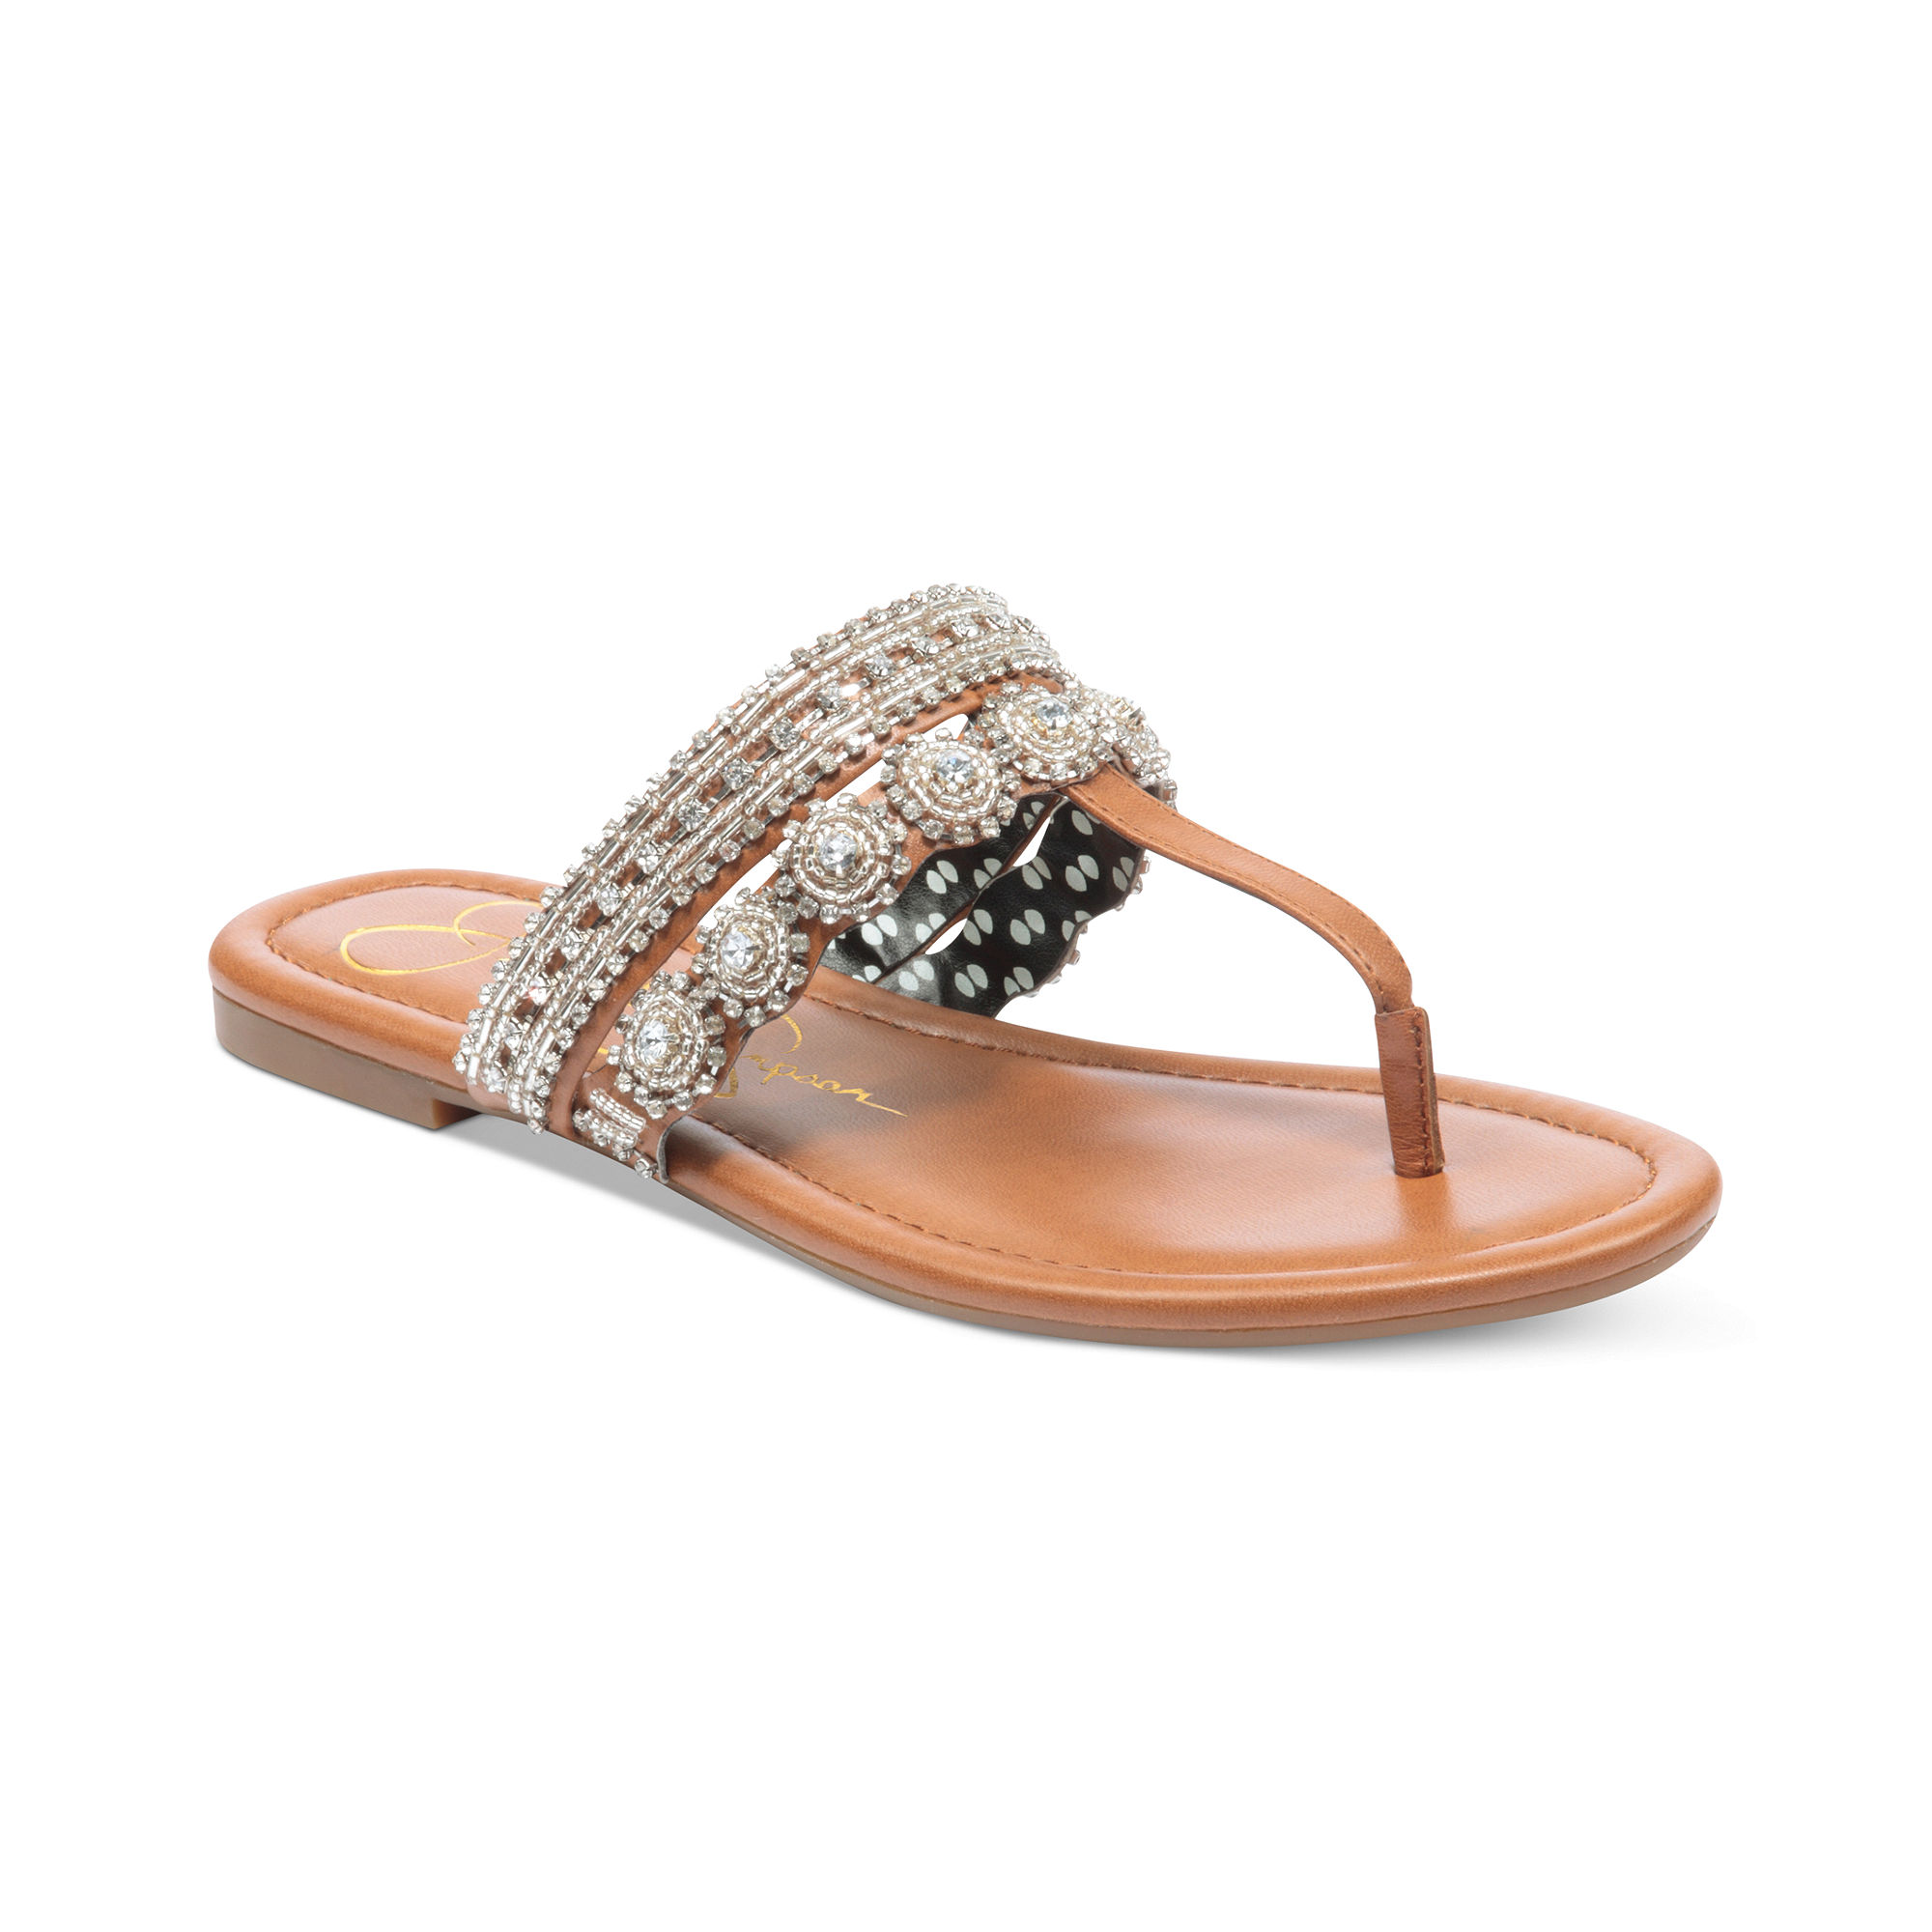 Lyst - Jessica Simpson Roelle Jeweled Thong Sandals in White